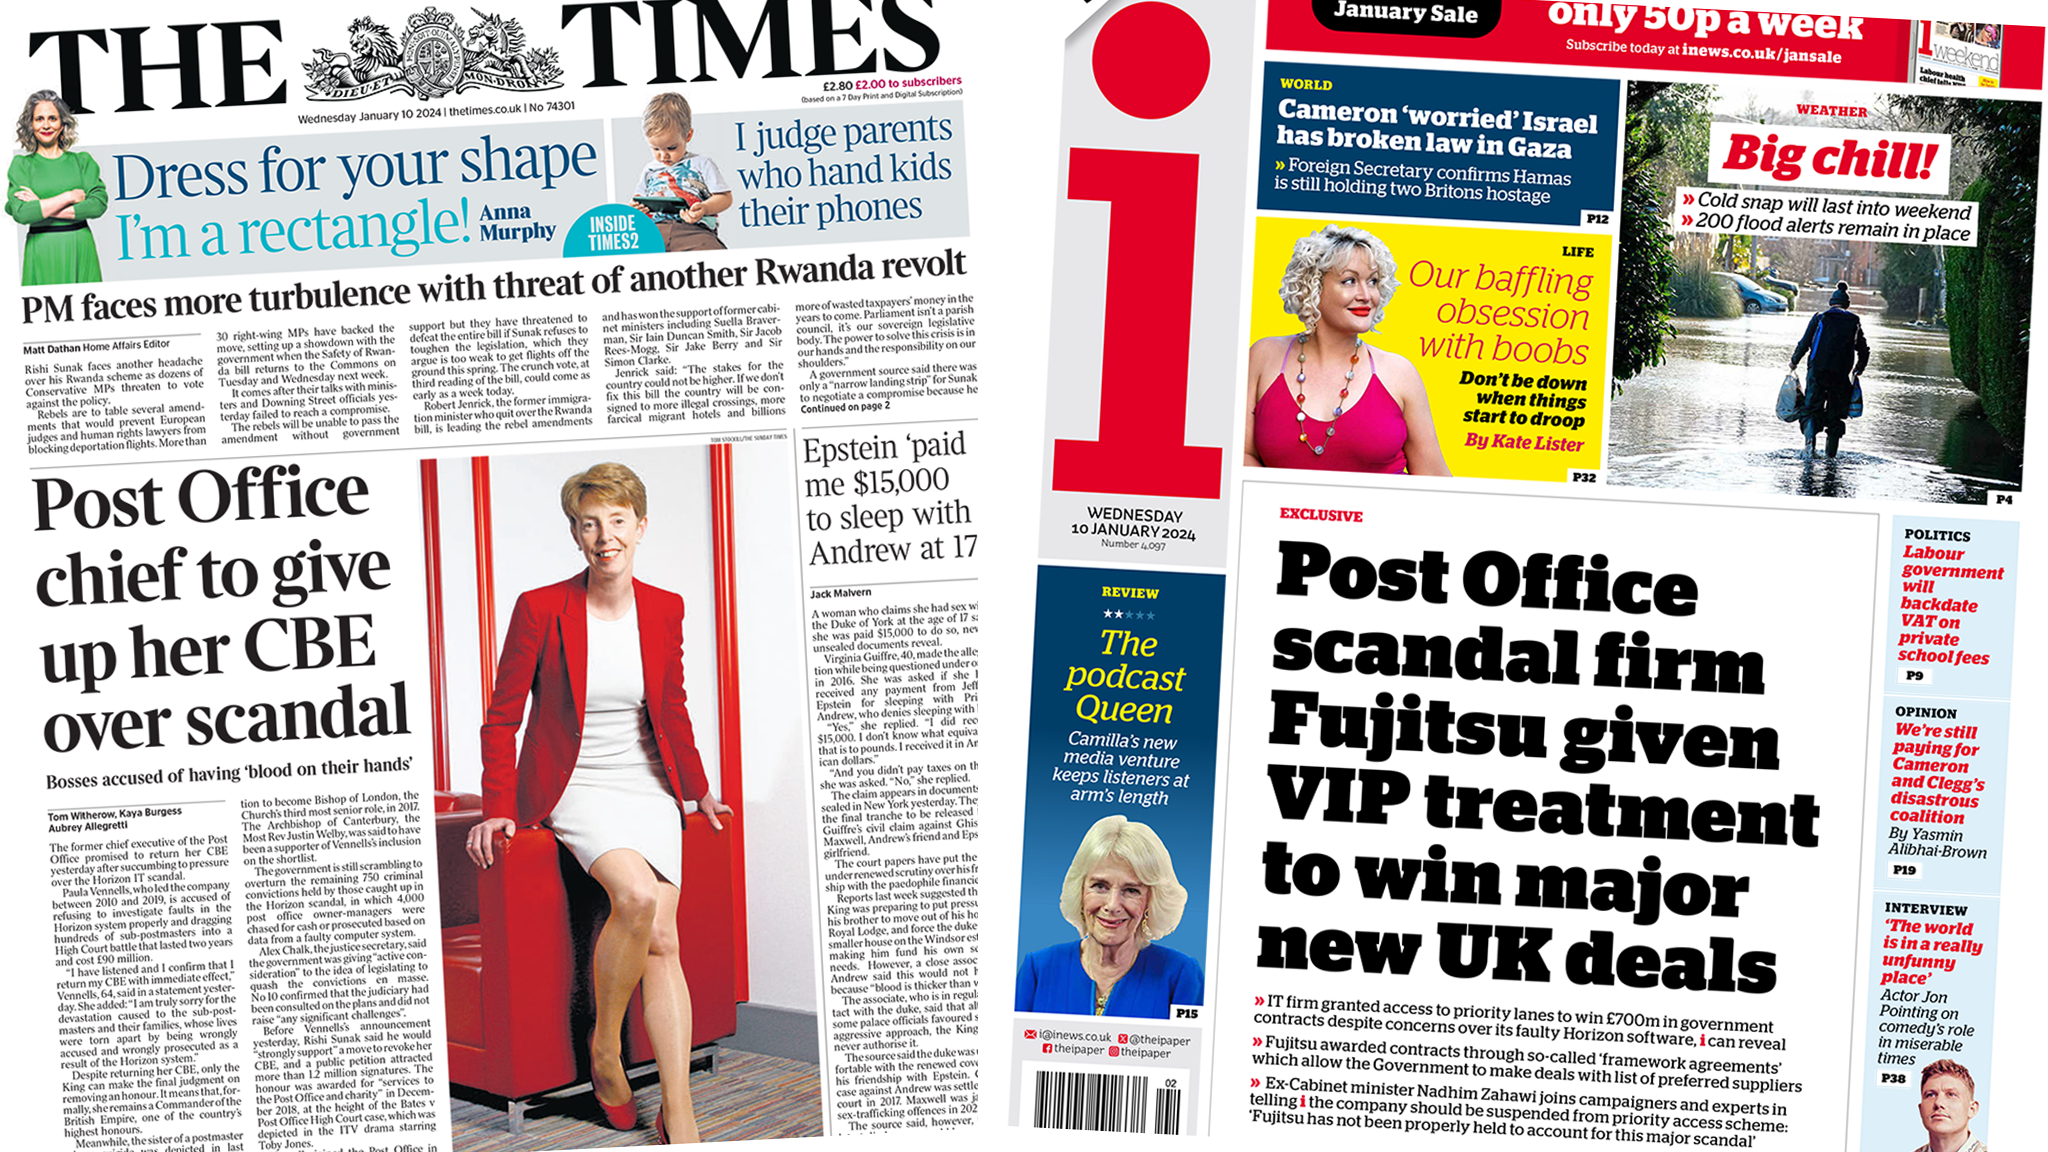 The headline in the Times reads, "Post Office chief to give up her CBE over scandal", while the headline in the i reads, "Post Office scandal firm Fujitsu given VIP treatment to win major new UK deals".